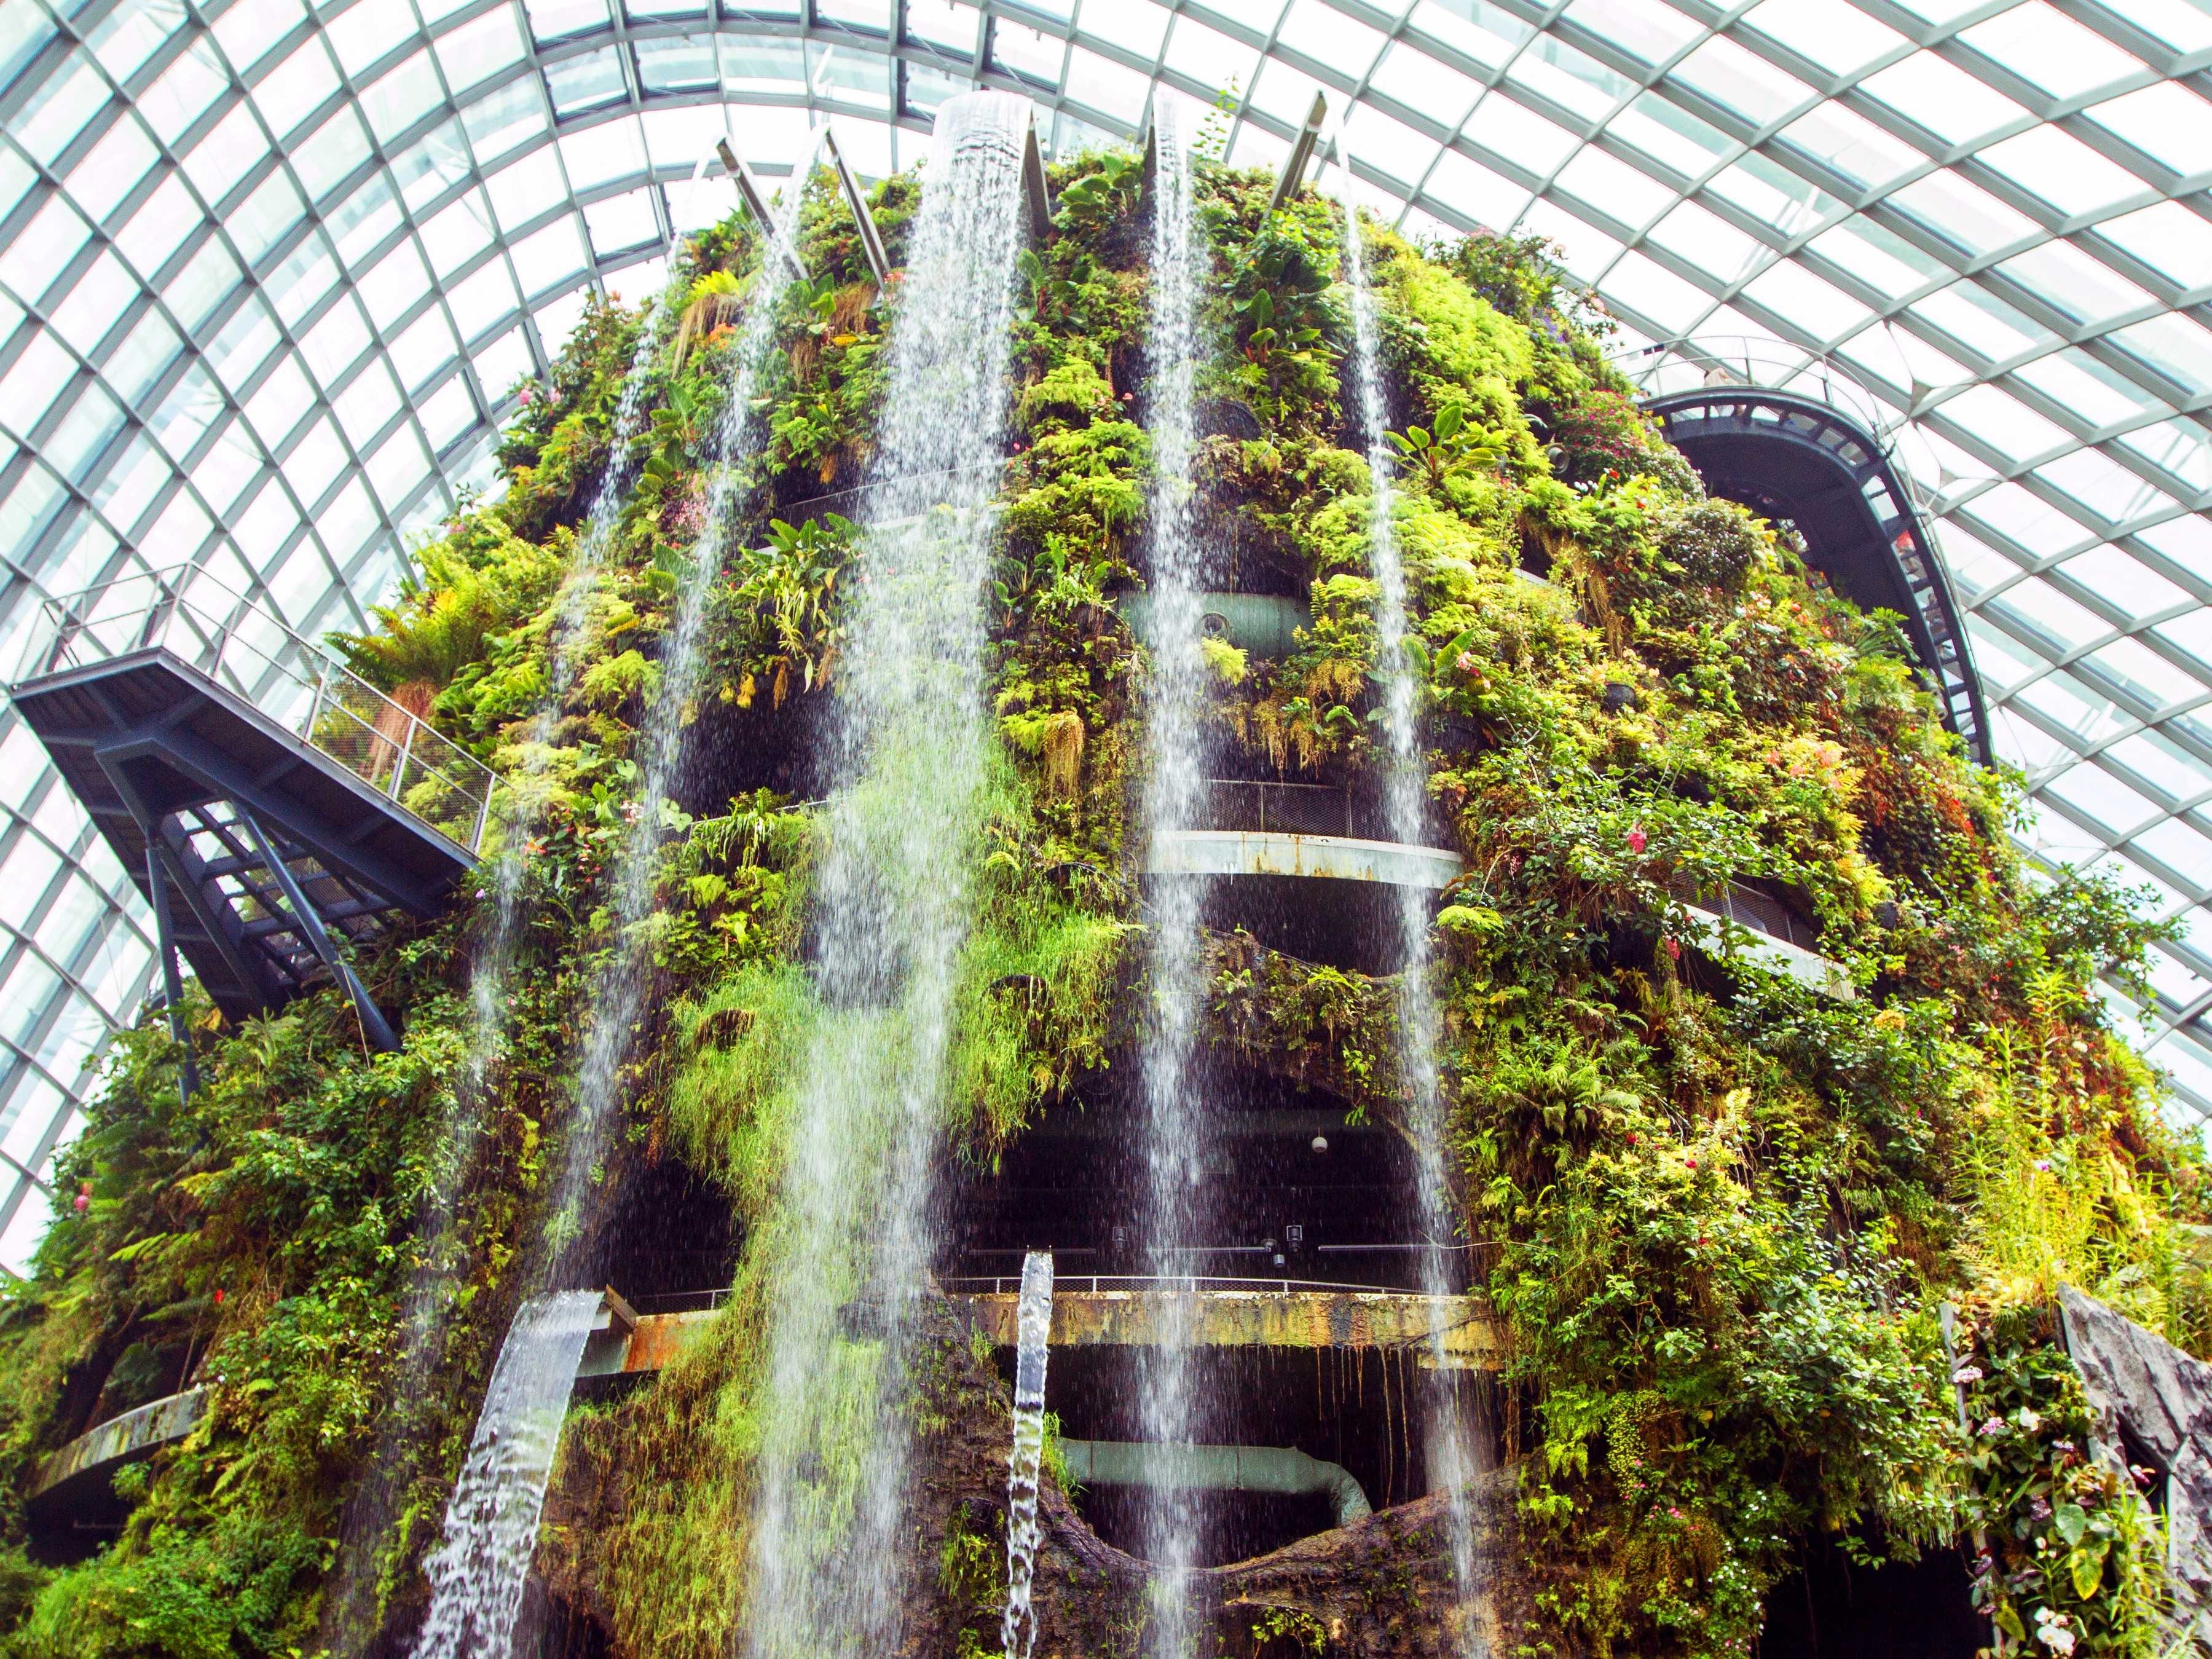 a-park-in-singapore-is-home-to-solar-powered-supertrees-and-an-incredible-indoor-waterfall.jpg